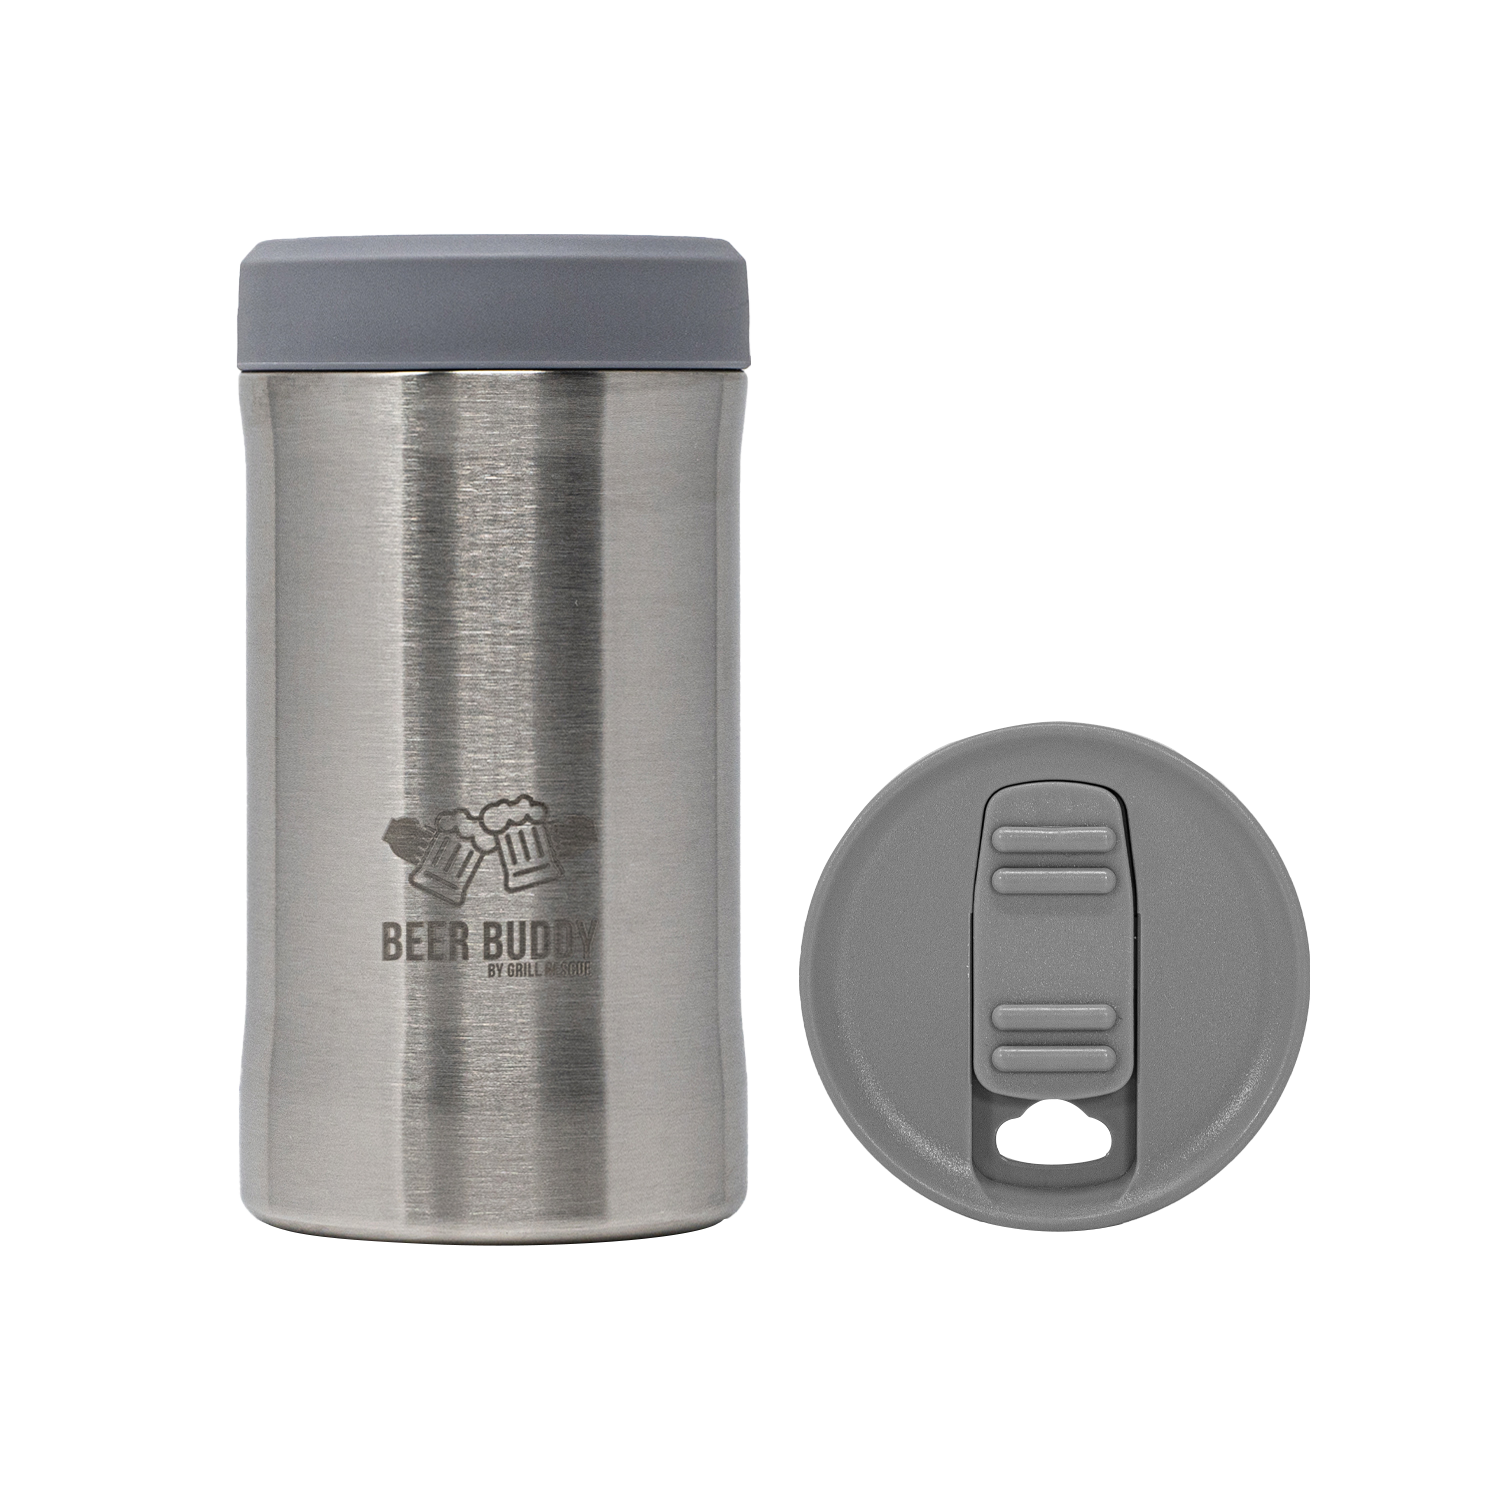 Koozie Triple 12oz Can Cooler, Bottle Holder, Tumbler Stainless Steel Double Wall Vacuum Sealed Insulated for Hot and Cold Drinks, White